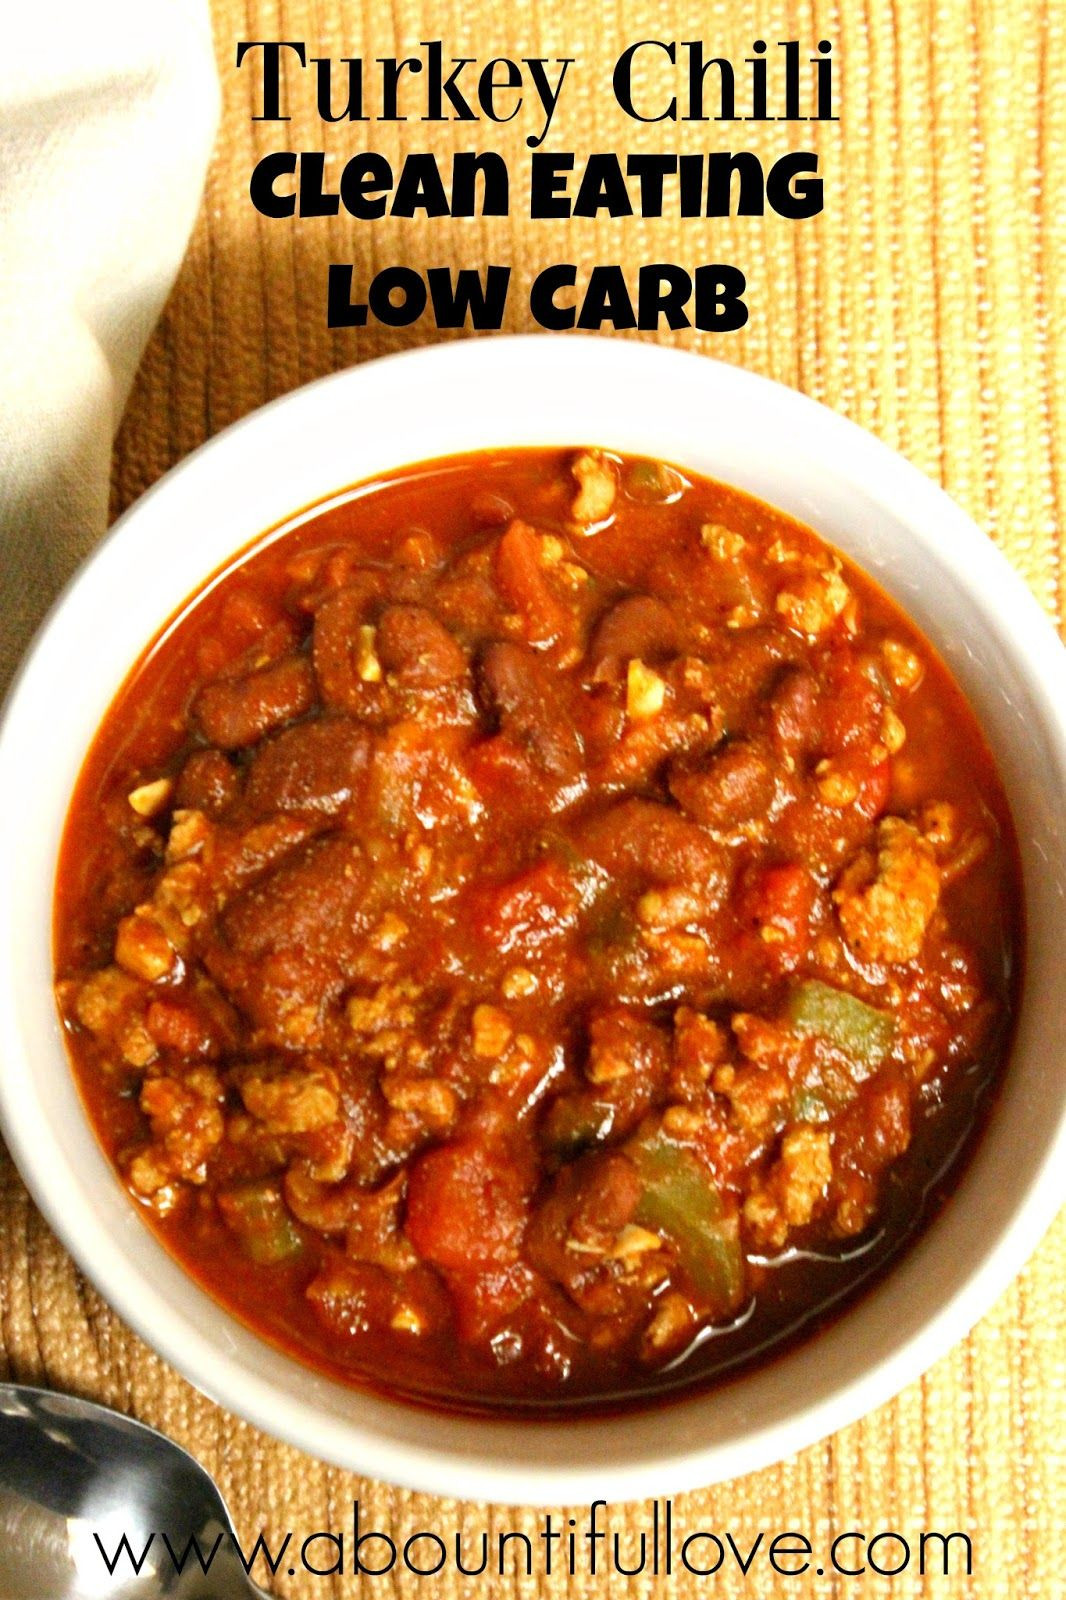 Low Calorie Turkey Chili
 Turkey Chili Clean Eating and Low Carb